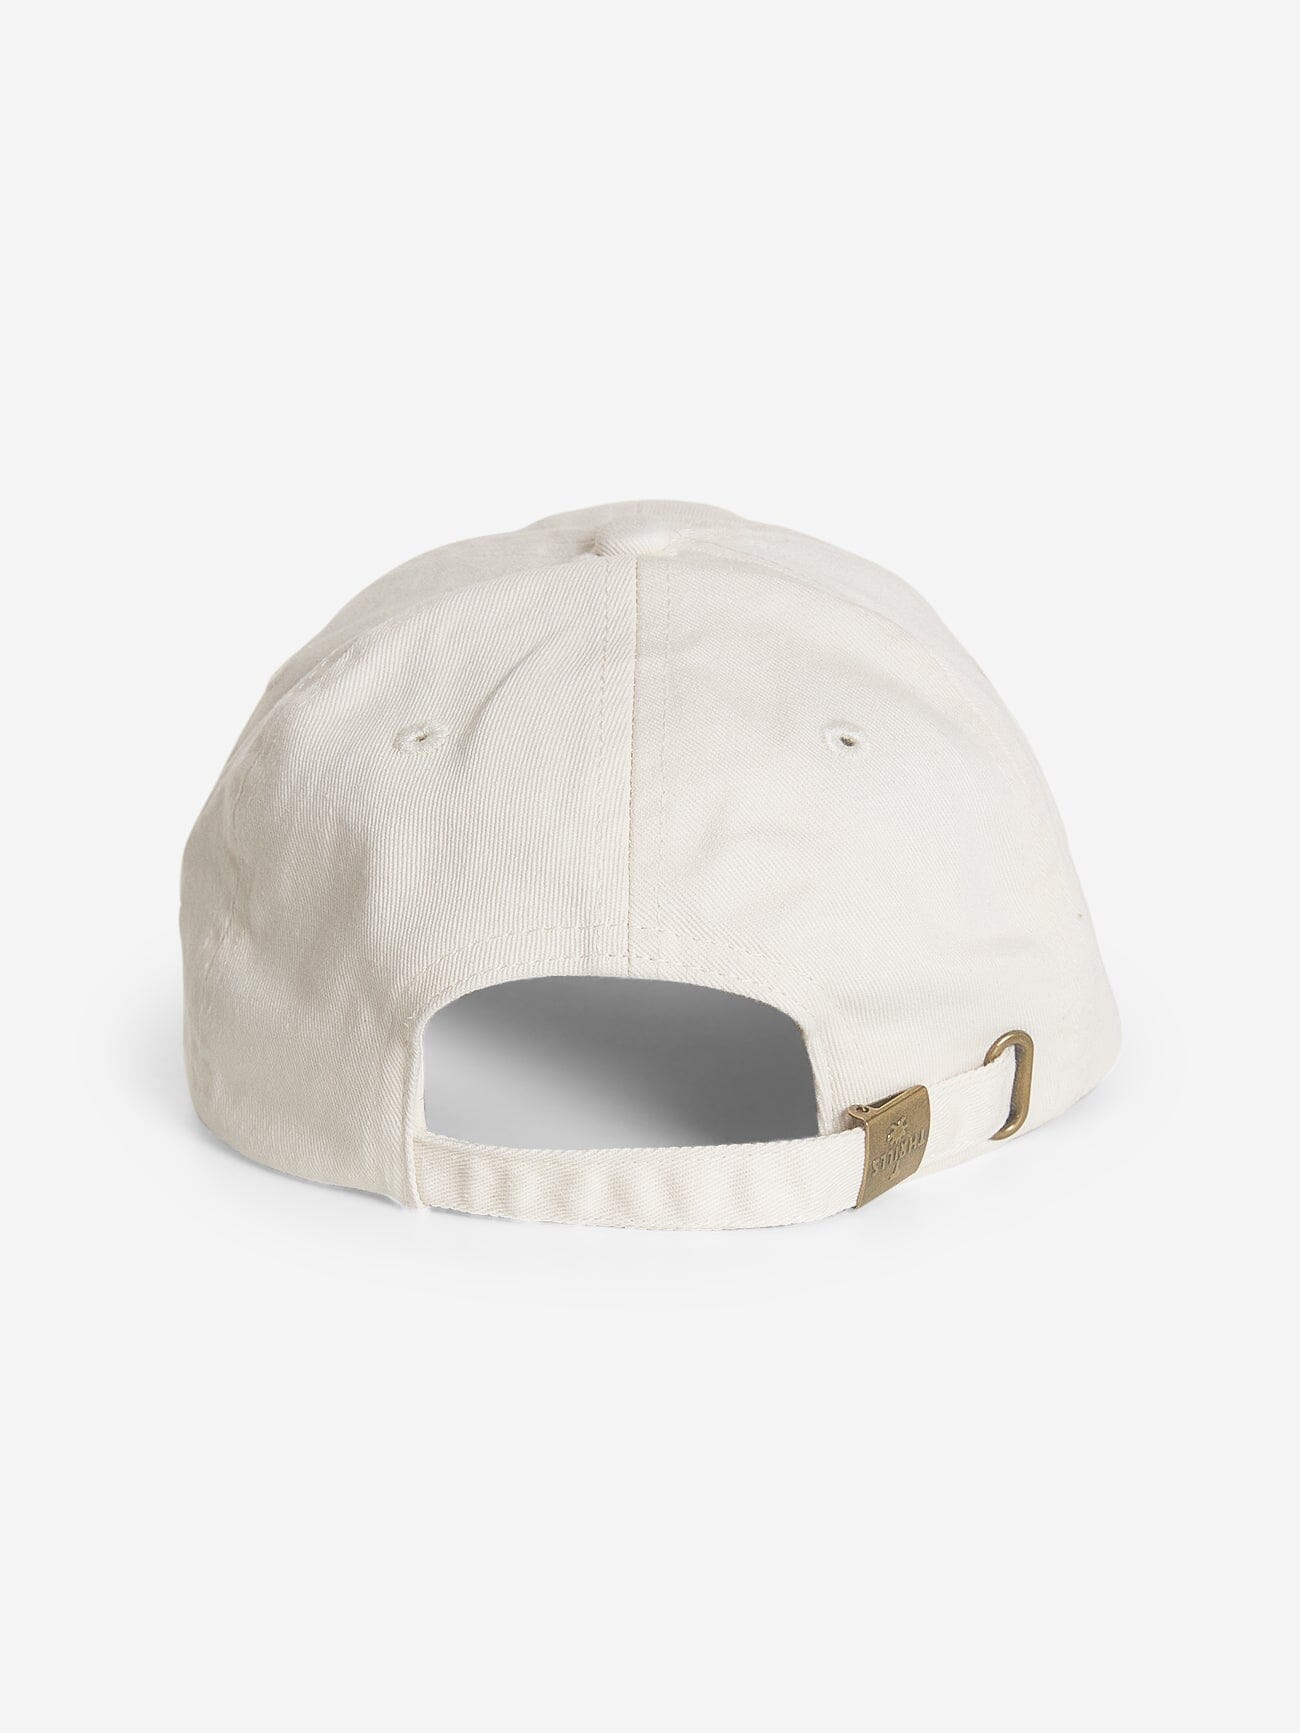 Chariot Rides on 6 Panel Cap - Heritage White One Size